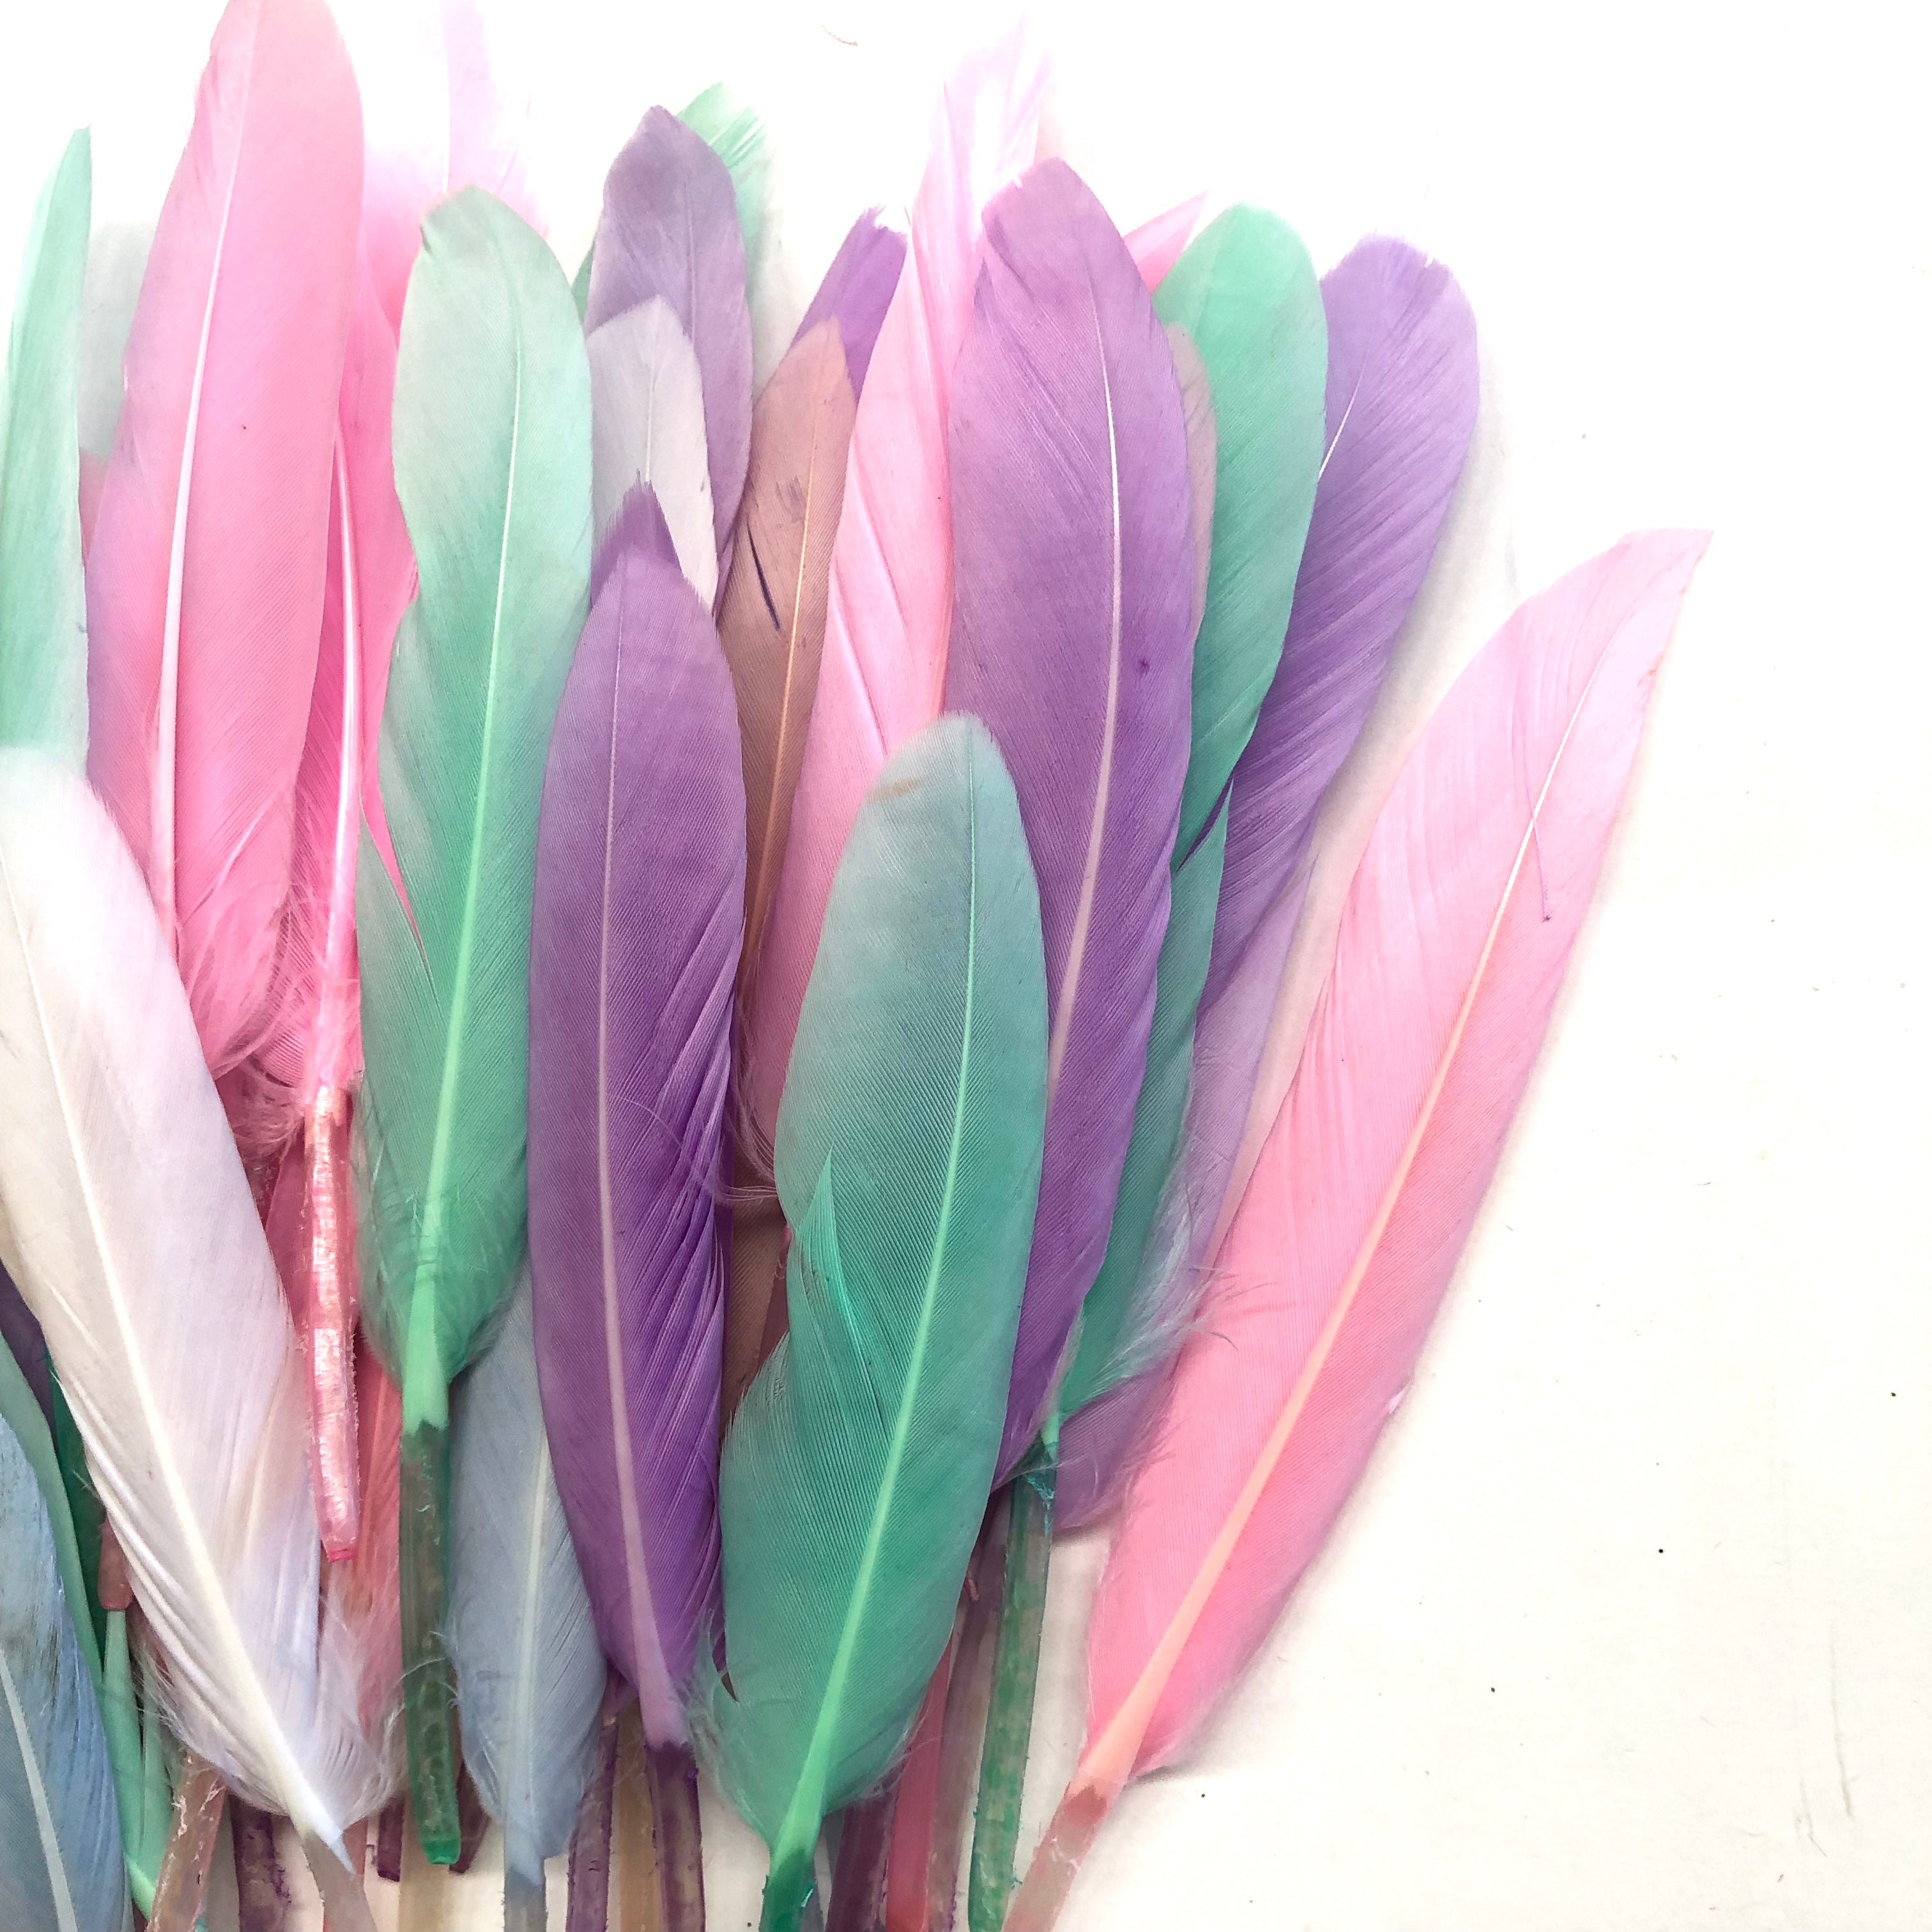 Tiny Goose Pointer Feather Pack x 50pcs - Pastel